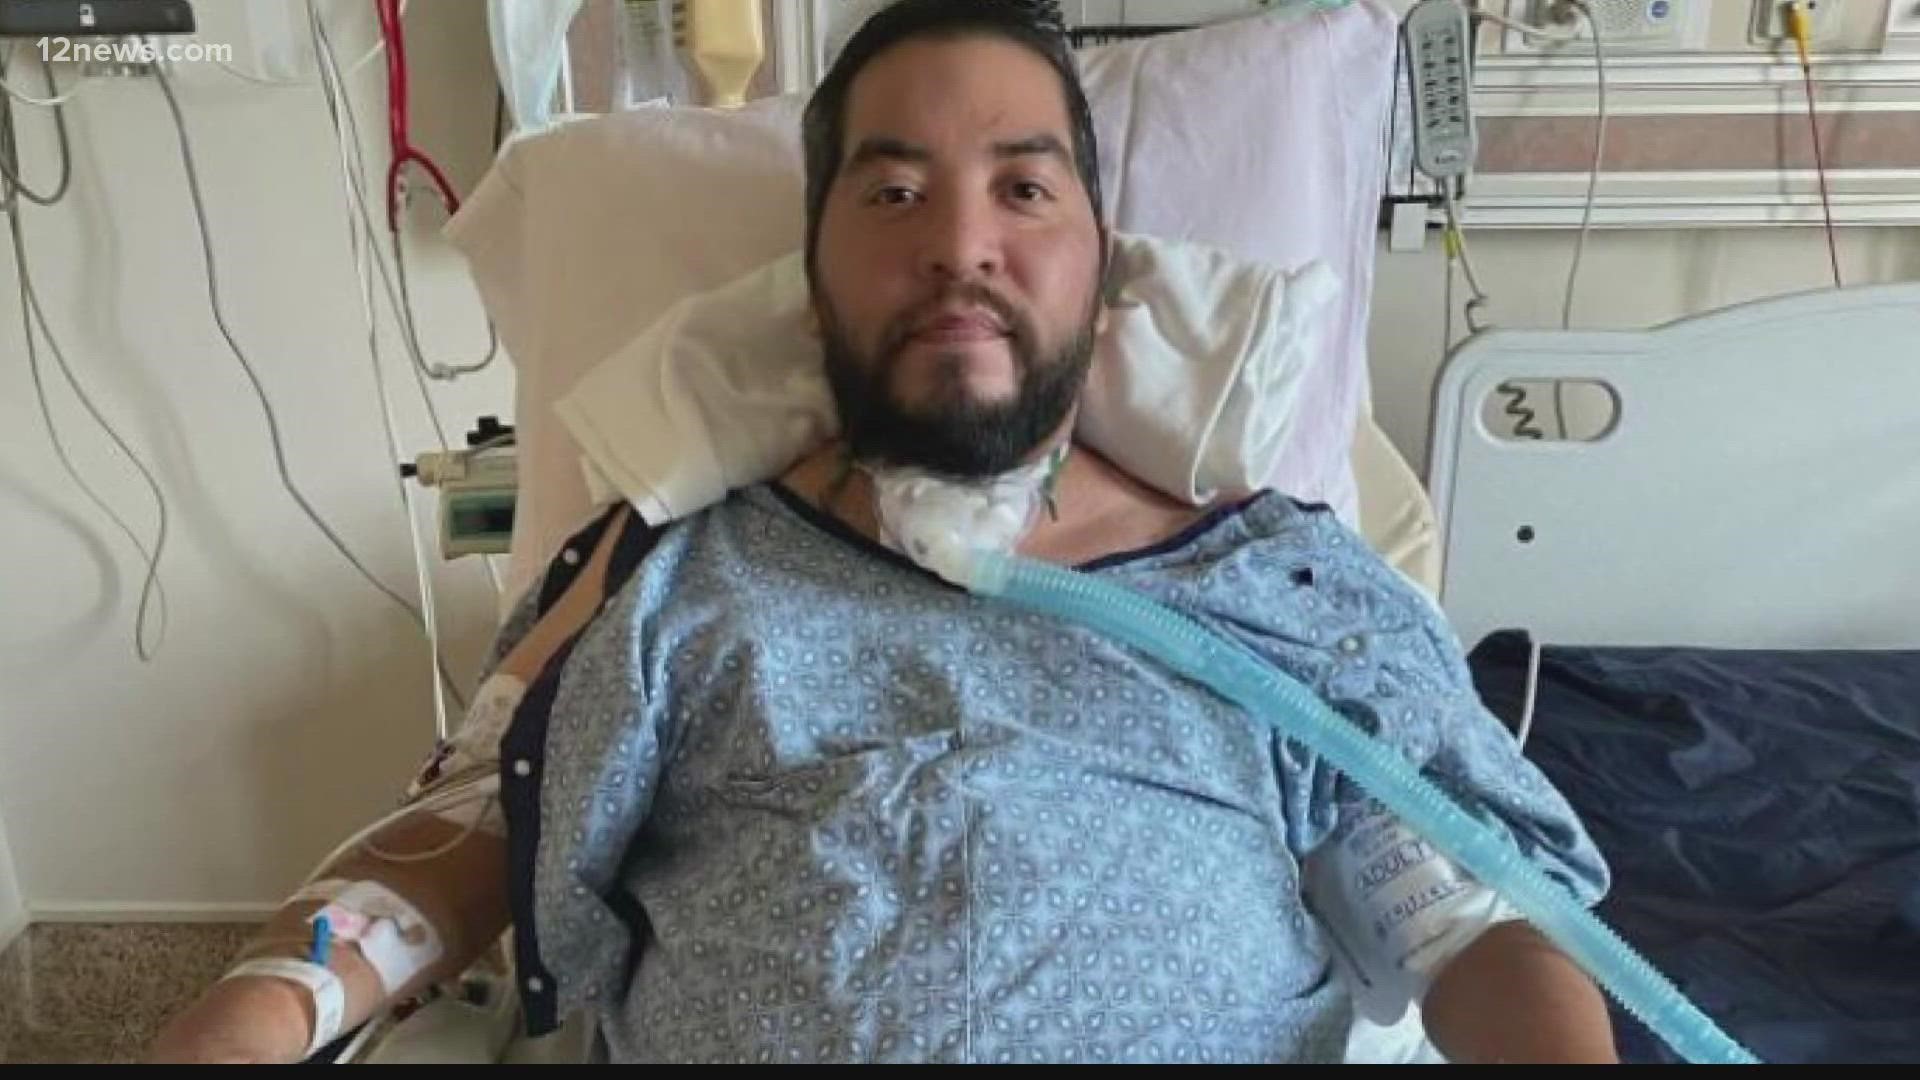 Elias Medina, a Valley DJ and barbershop owner, is recovering from a long battle with COVID. Medina is now in a rehab facility after being hospitalized for 2 months.